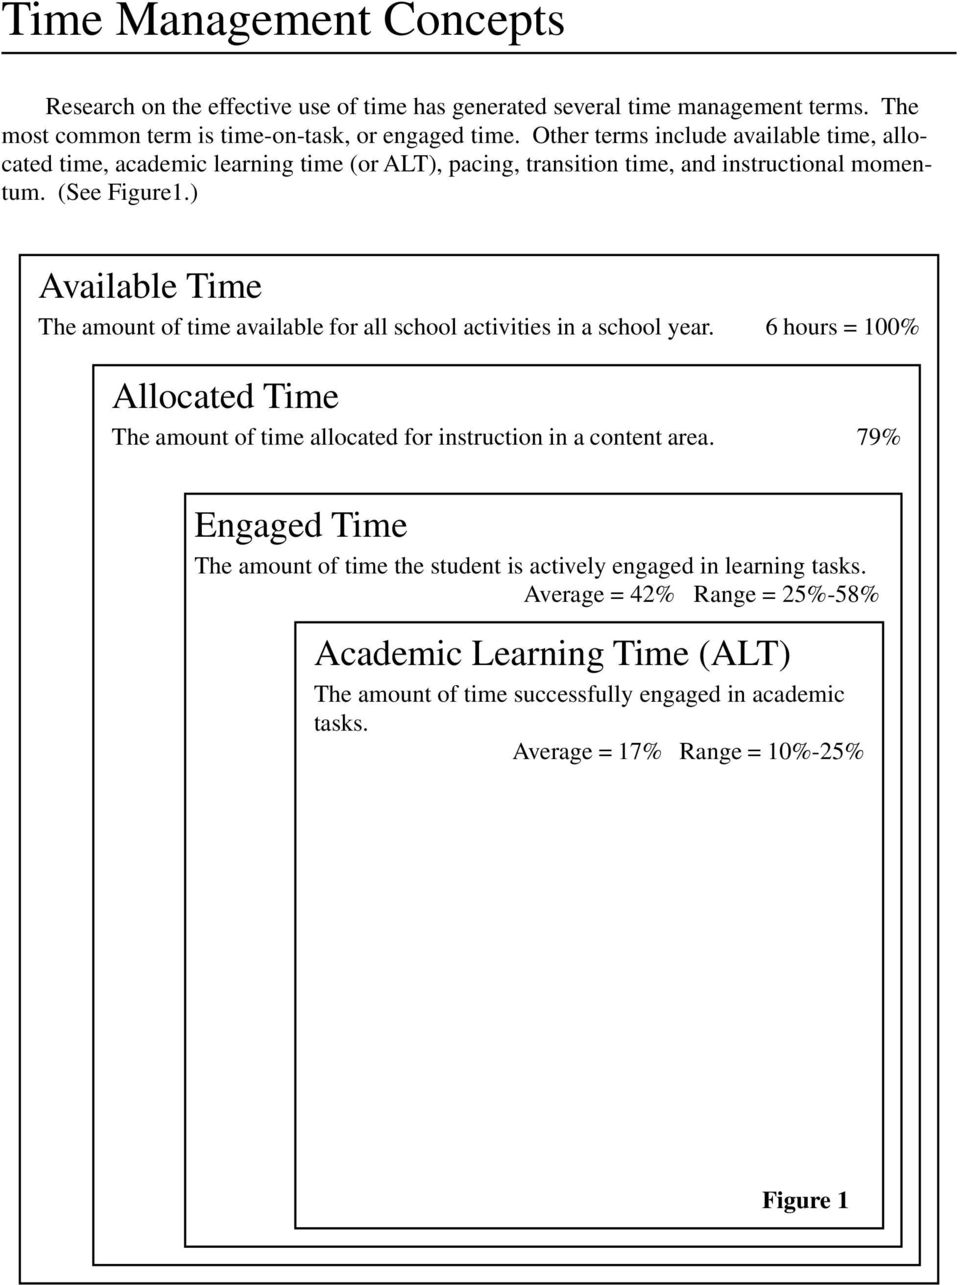 ) Available Time The amount of time available for all school activities in a school year. 6 hours = 100% Allocated Time The amount of time allocated for instruction in a content area.